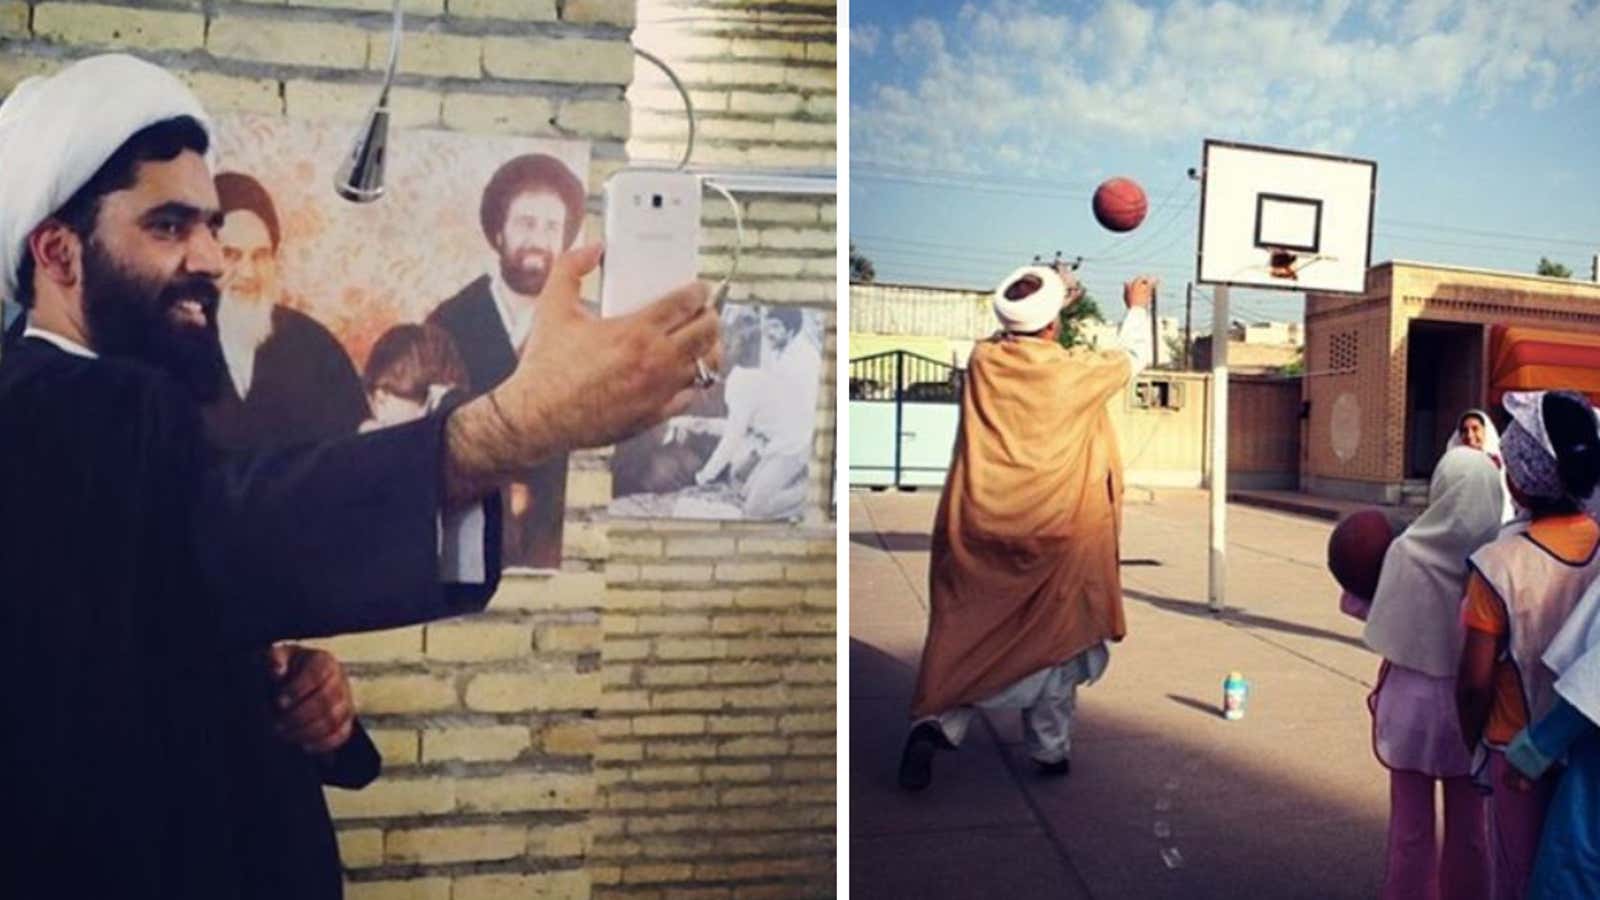 Iranian imams are showing their fun side on Instagram